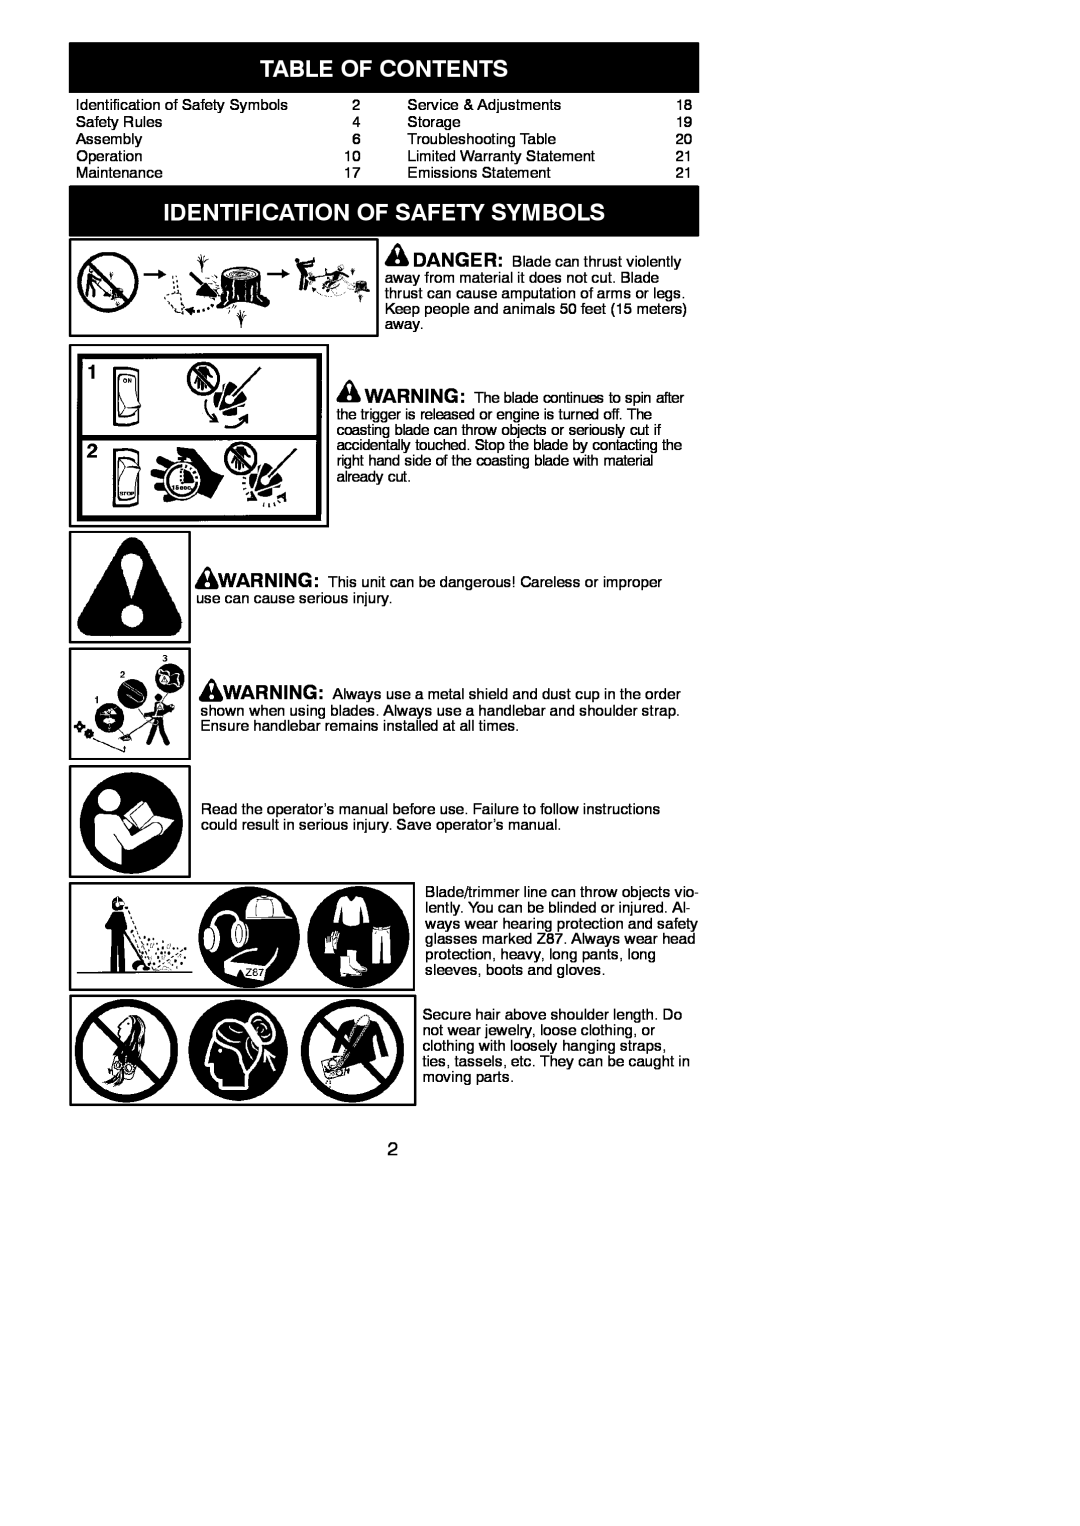 Poulan 545186843 instruction manual Table Of Contents, Identification Of Safety Symbols 